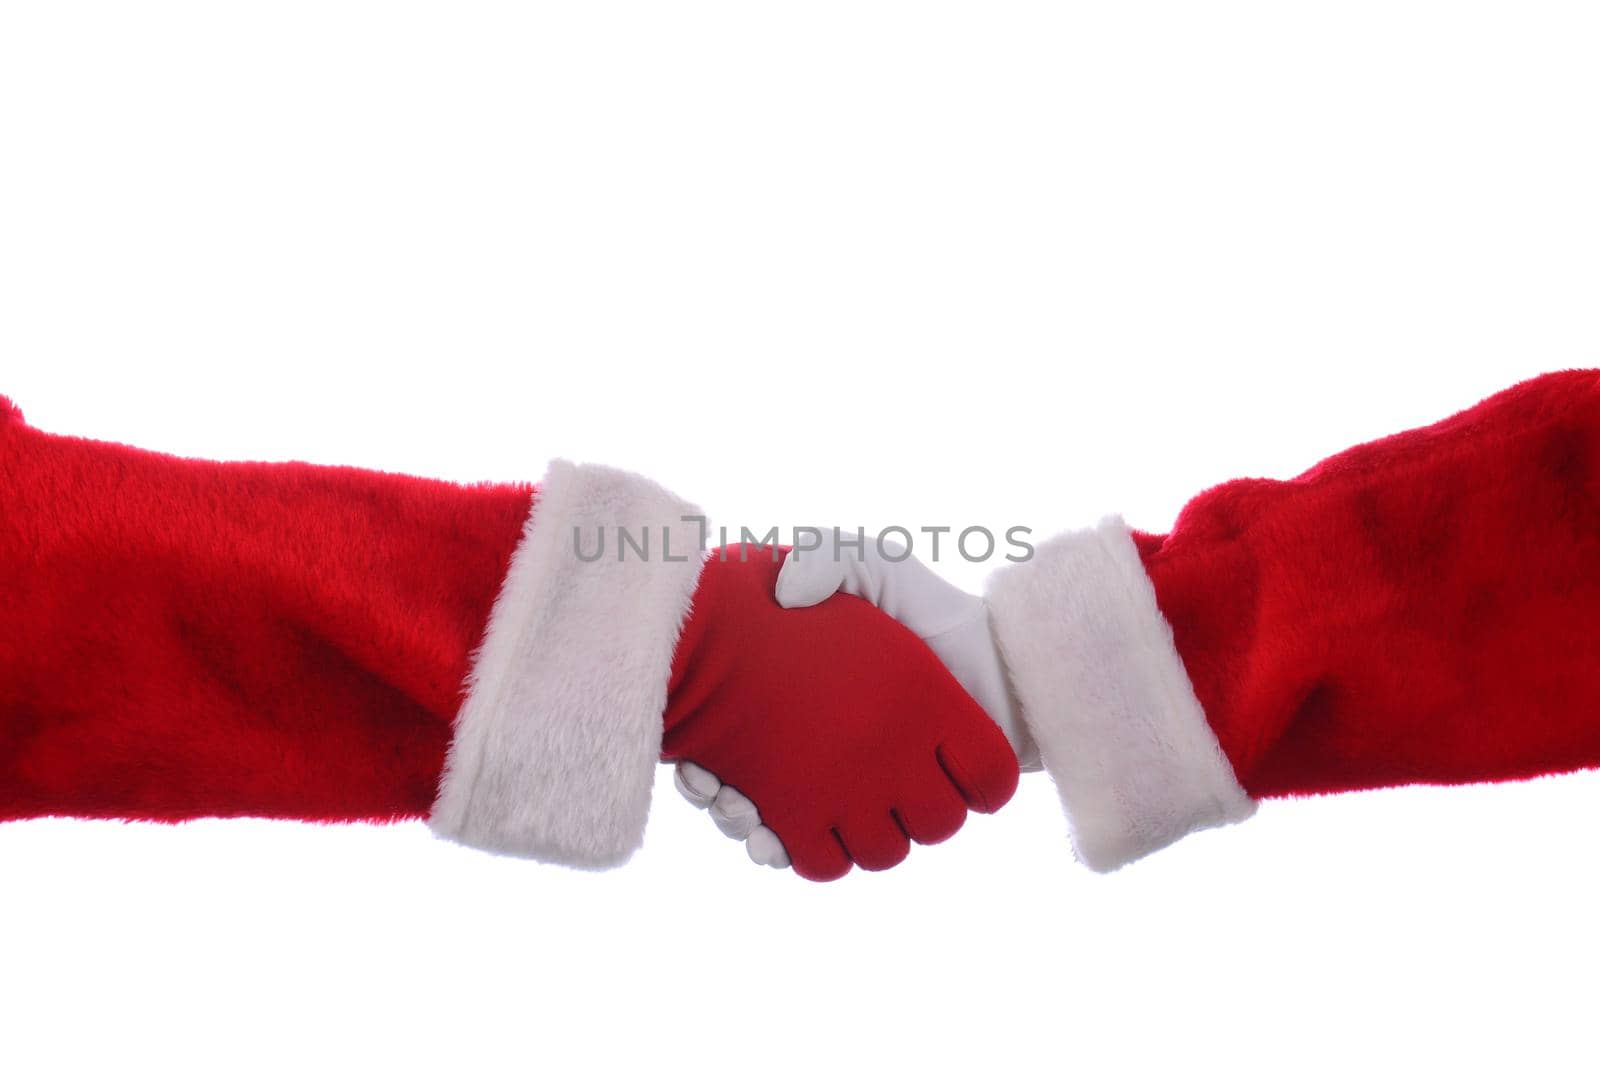 Two Santa Claus' shaking hands by sCukrov